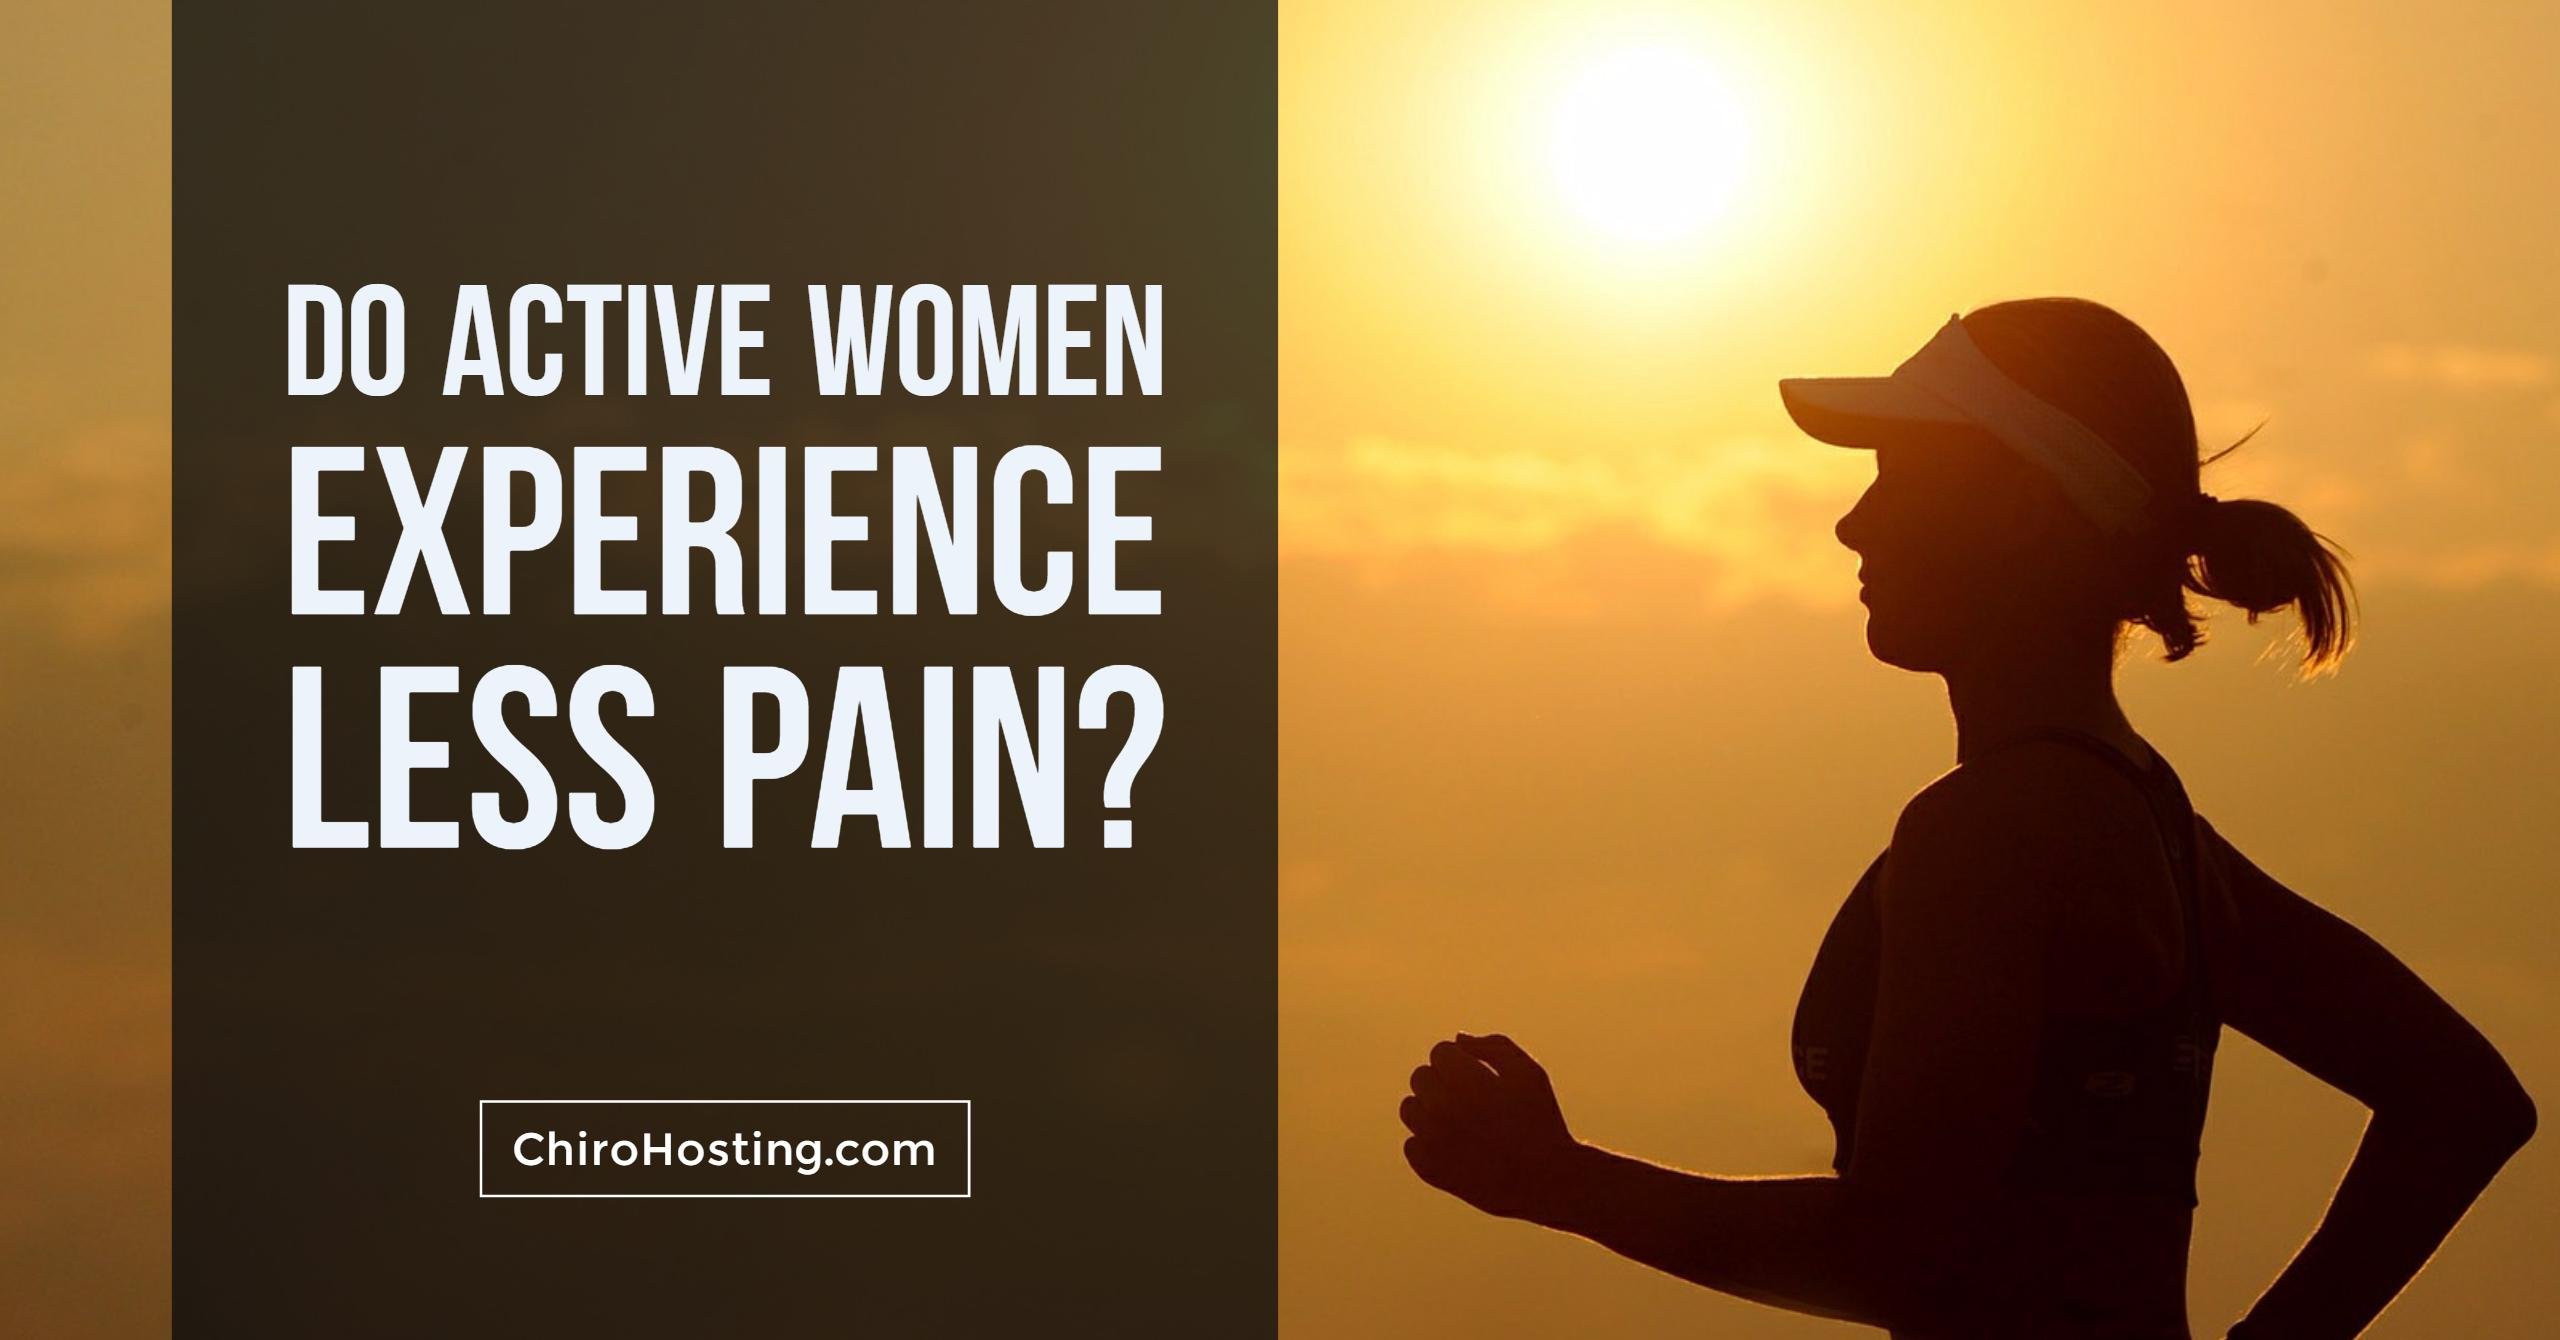 Do Active Women Experience Less Pain?